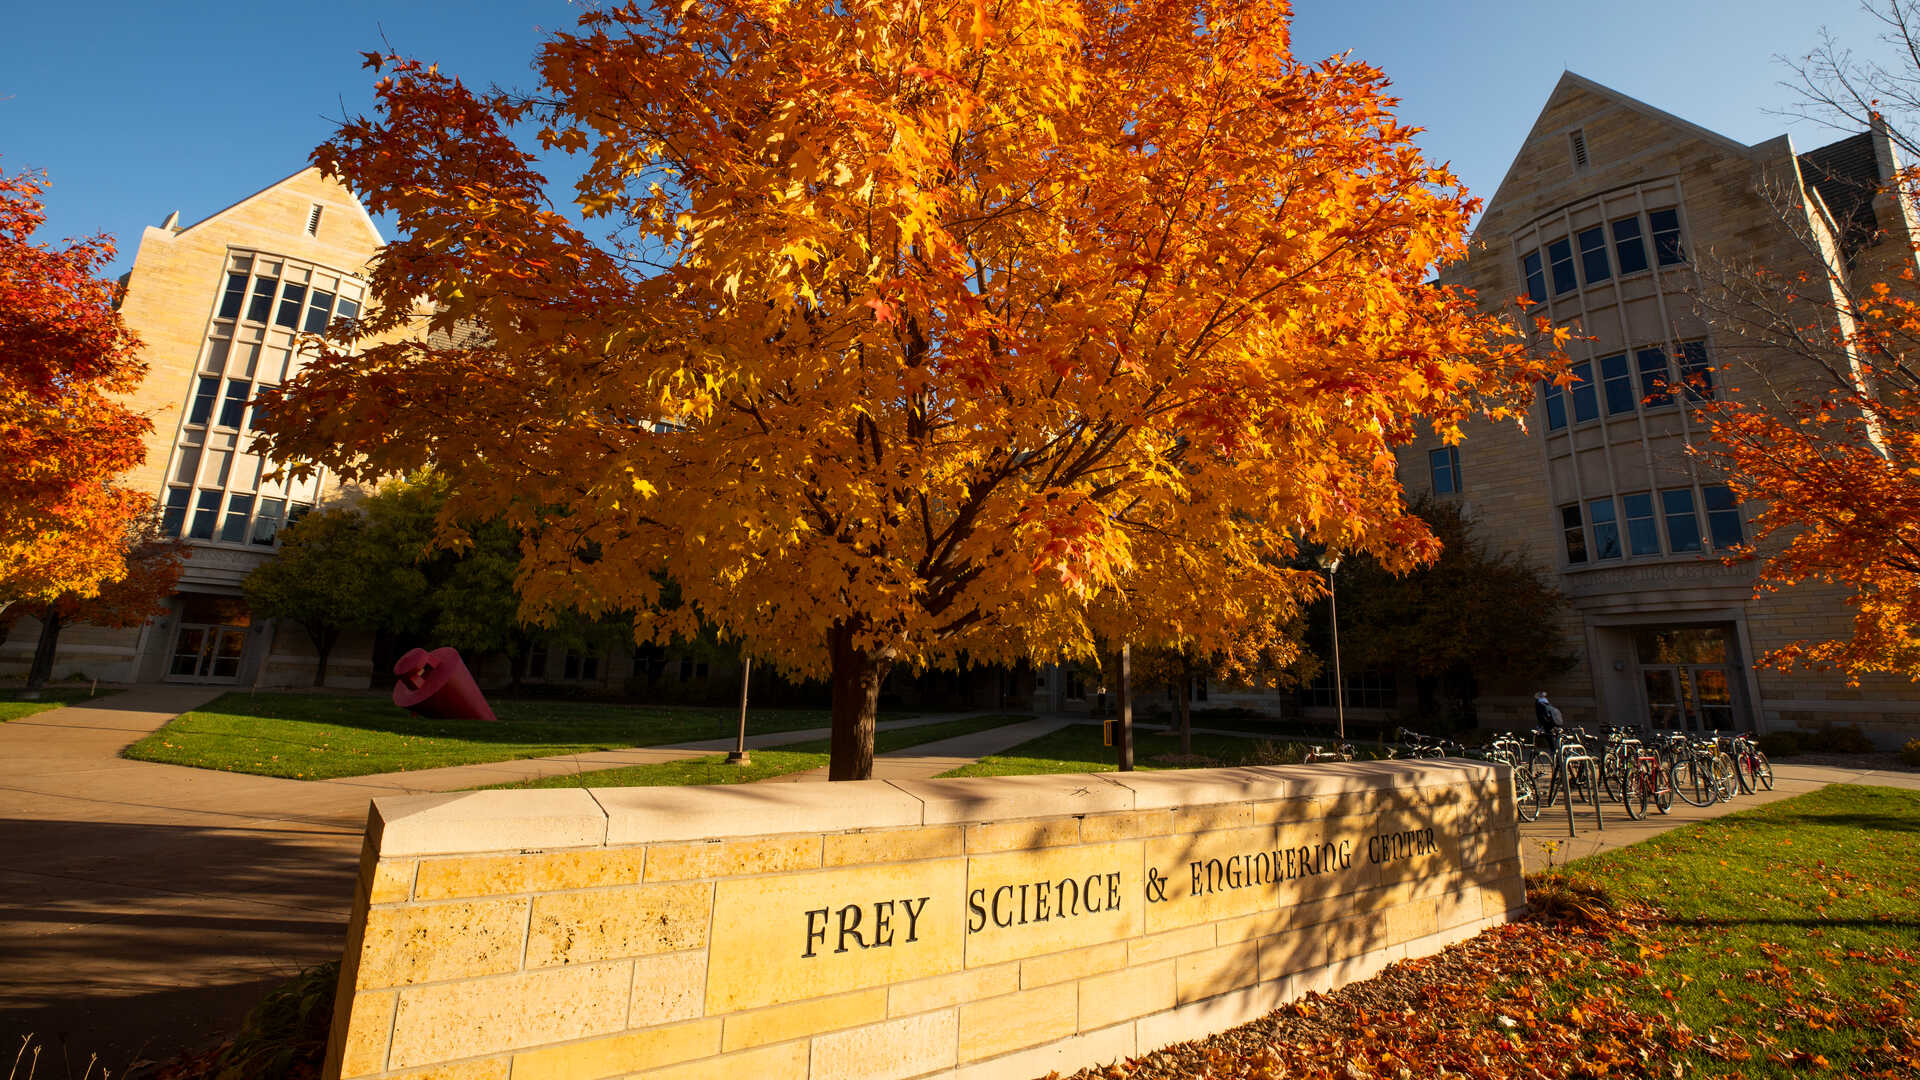 Frey Science and Engineering Complex